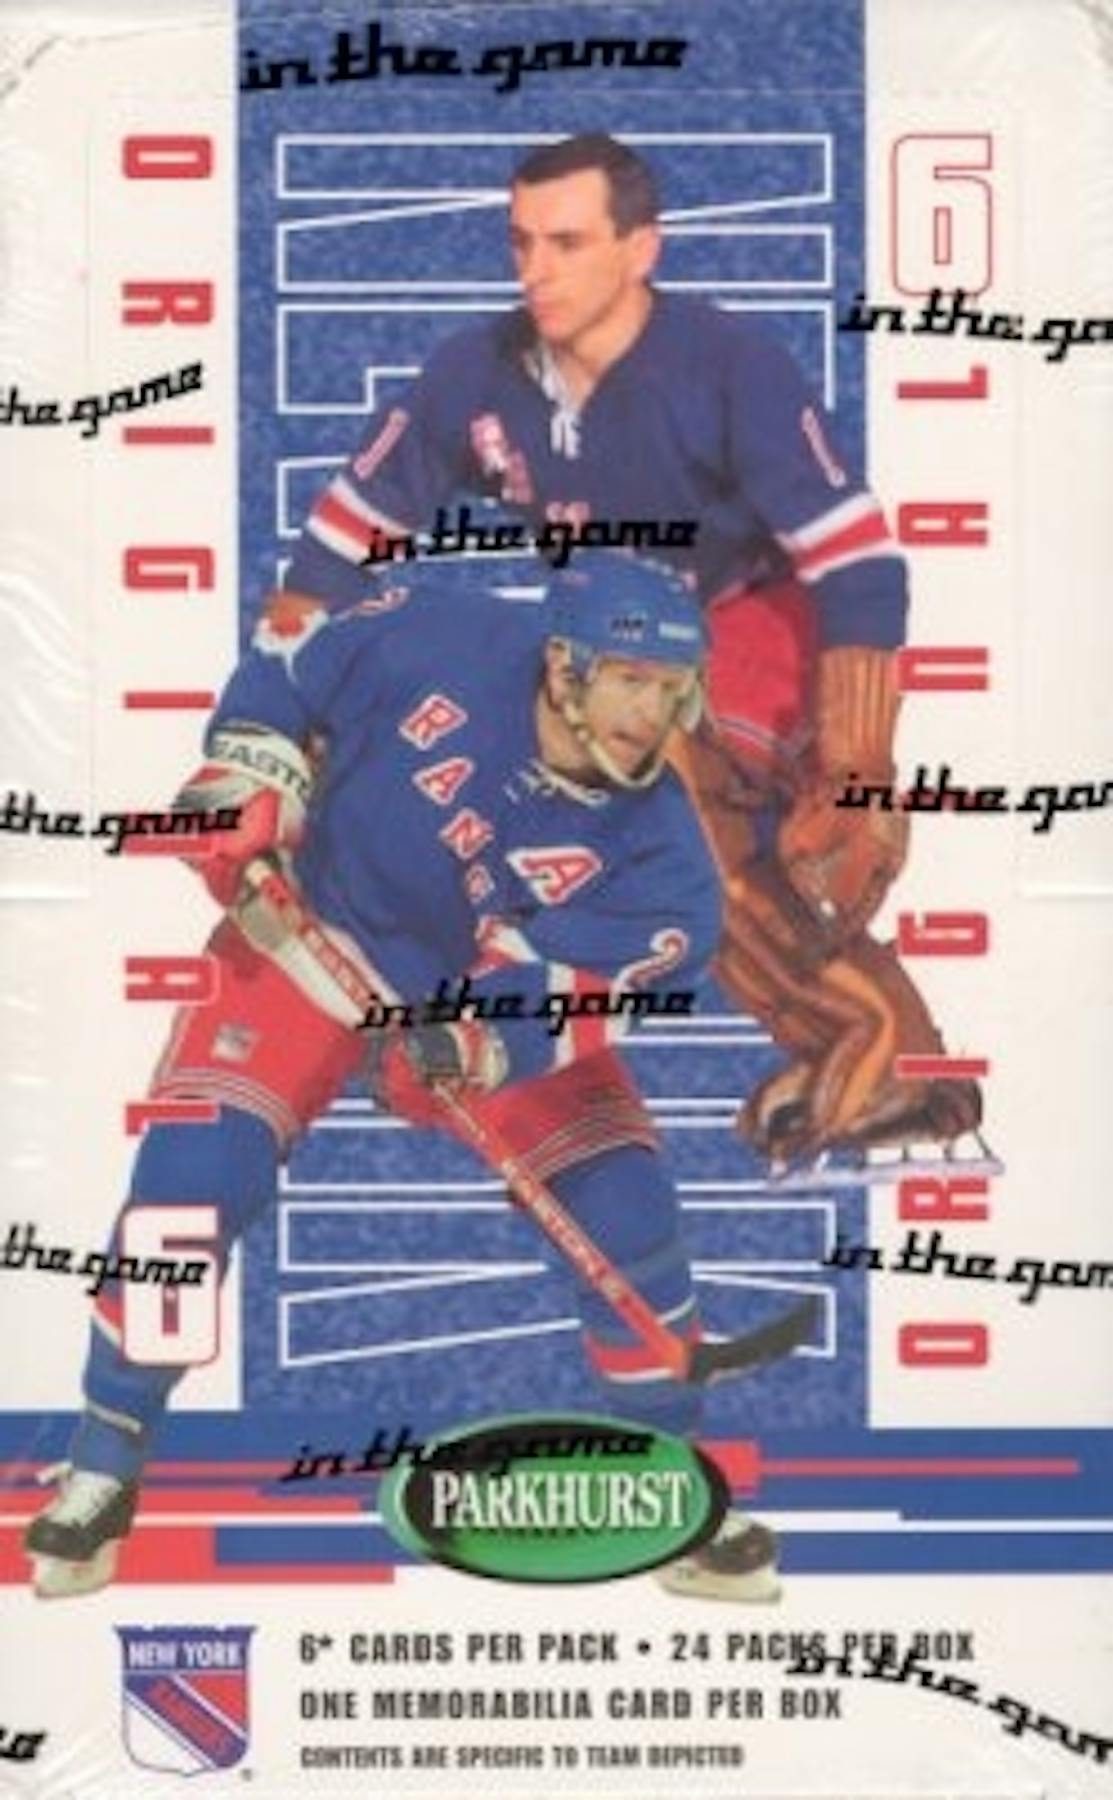 Player photos for the 2003-04 New York Rangers at